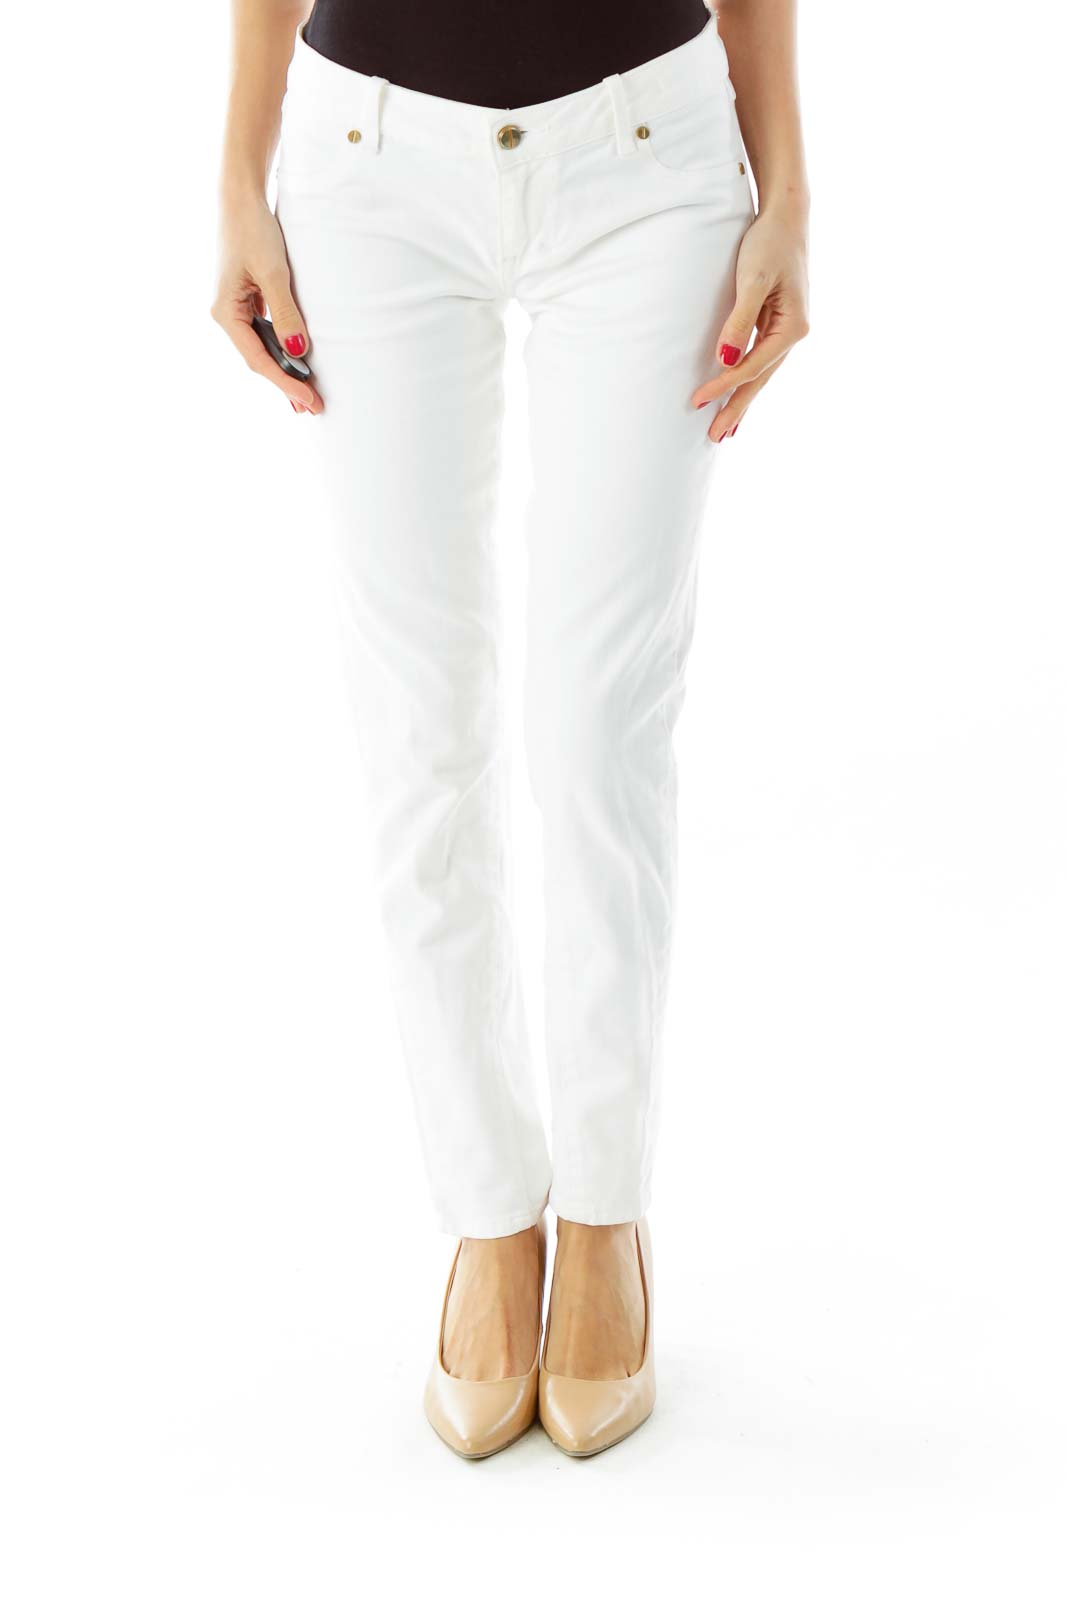 White Fitted Straight Legged Jeans Front